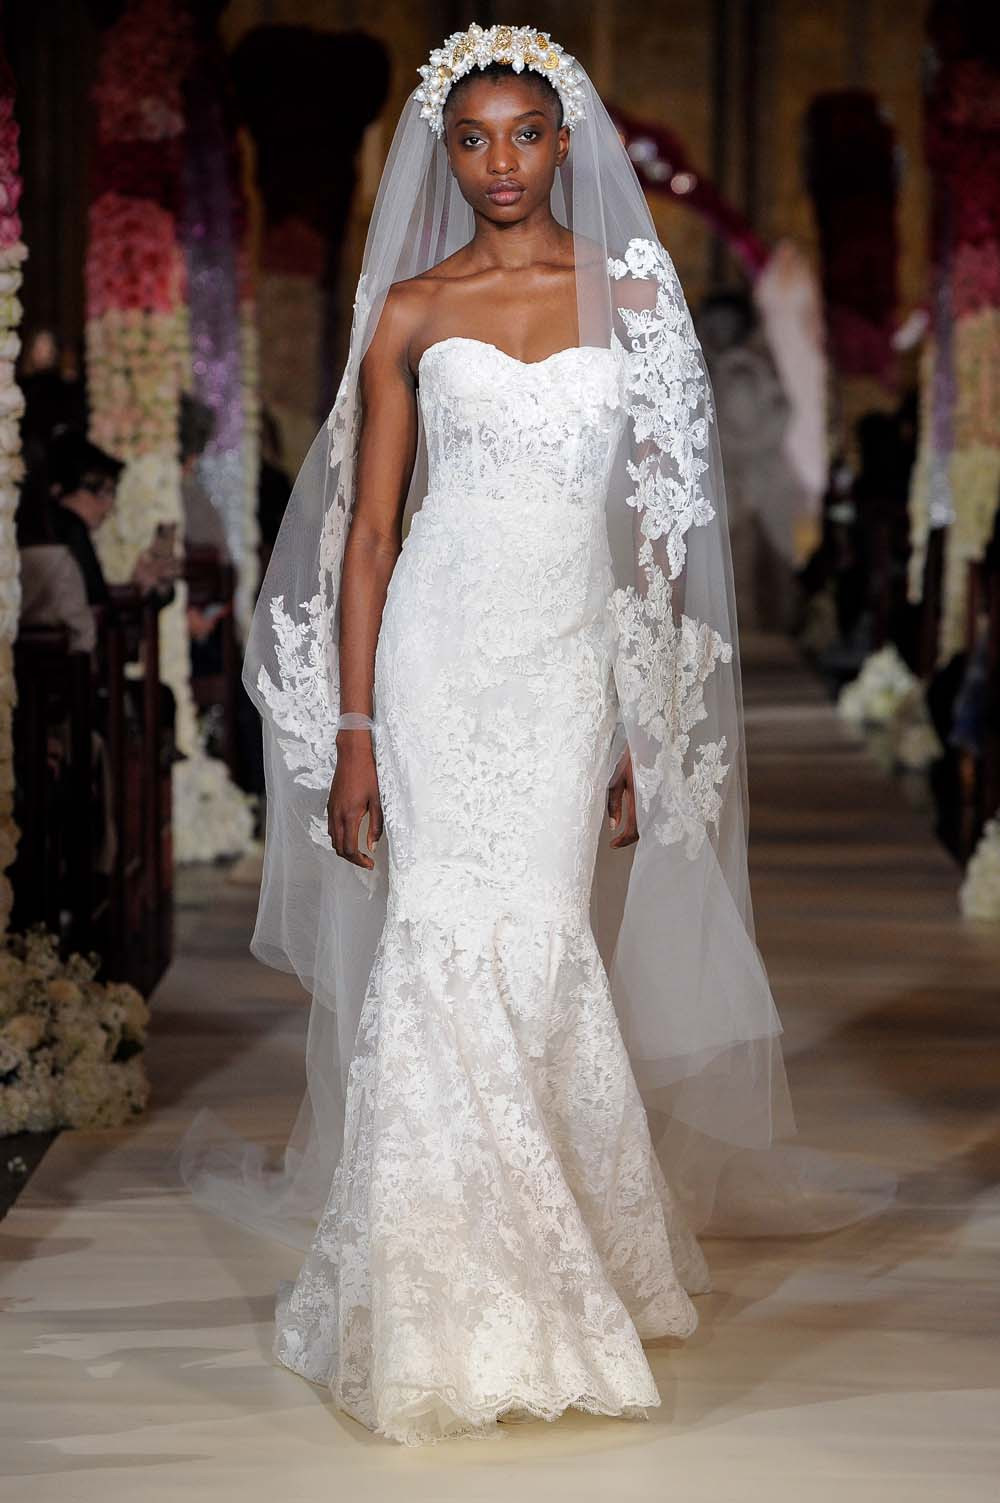 Bridal Looks 2020
 The Must See Bridal Fashion Trends For Spring 2020